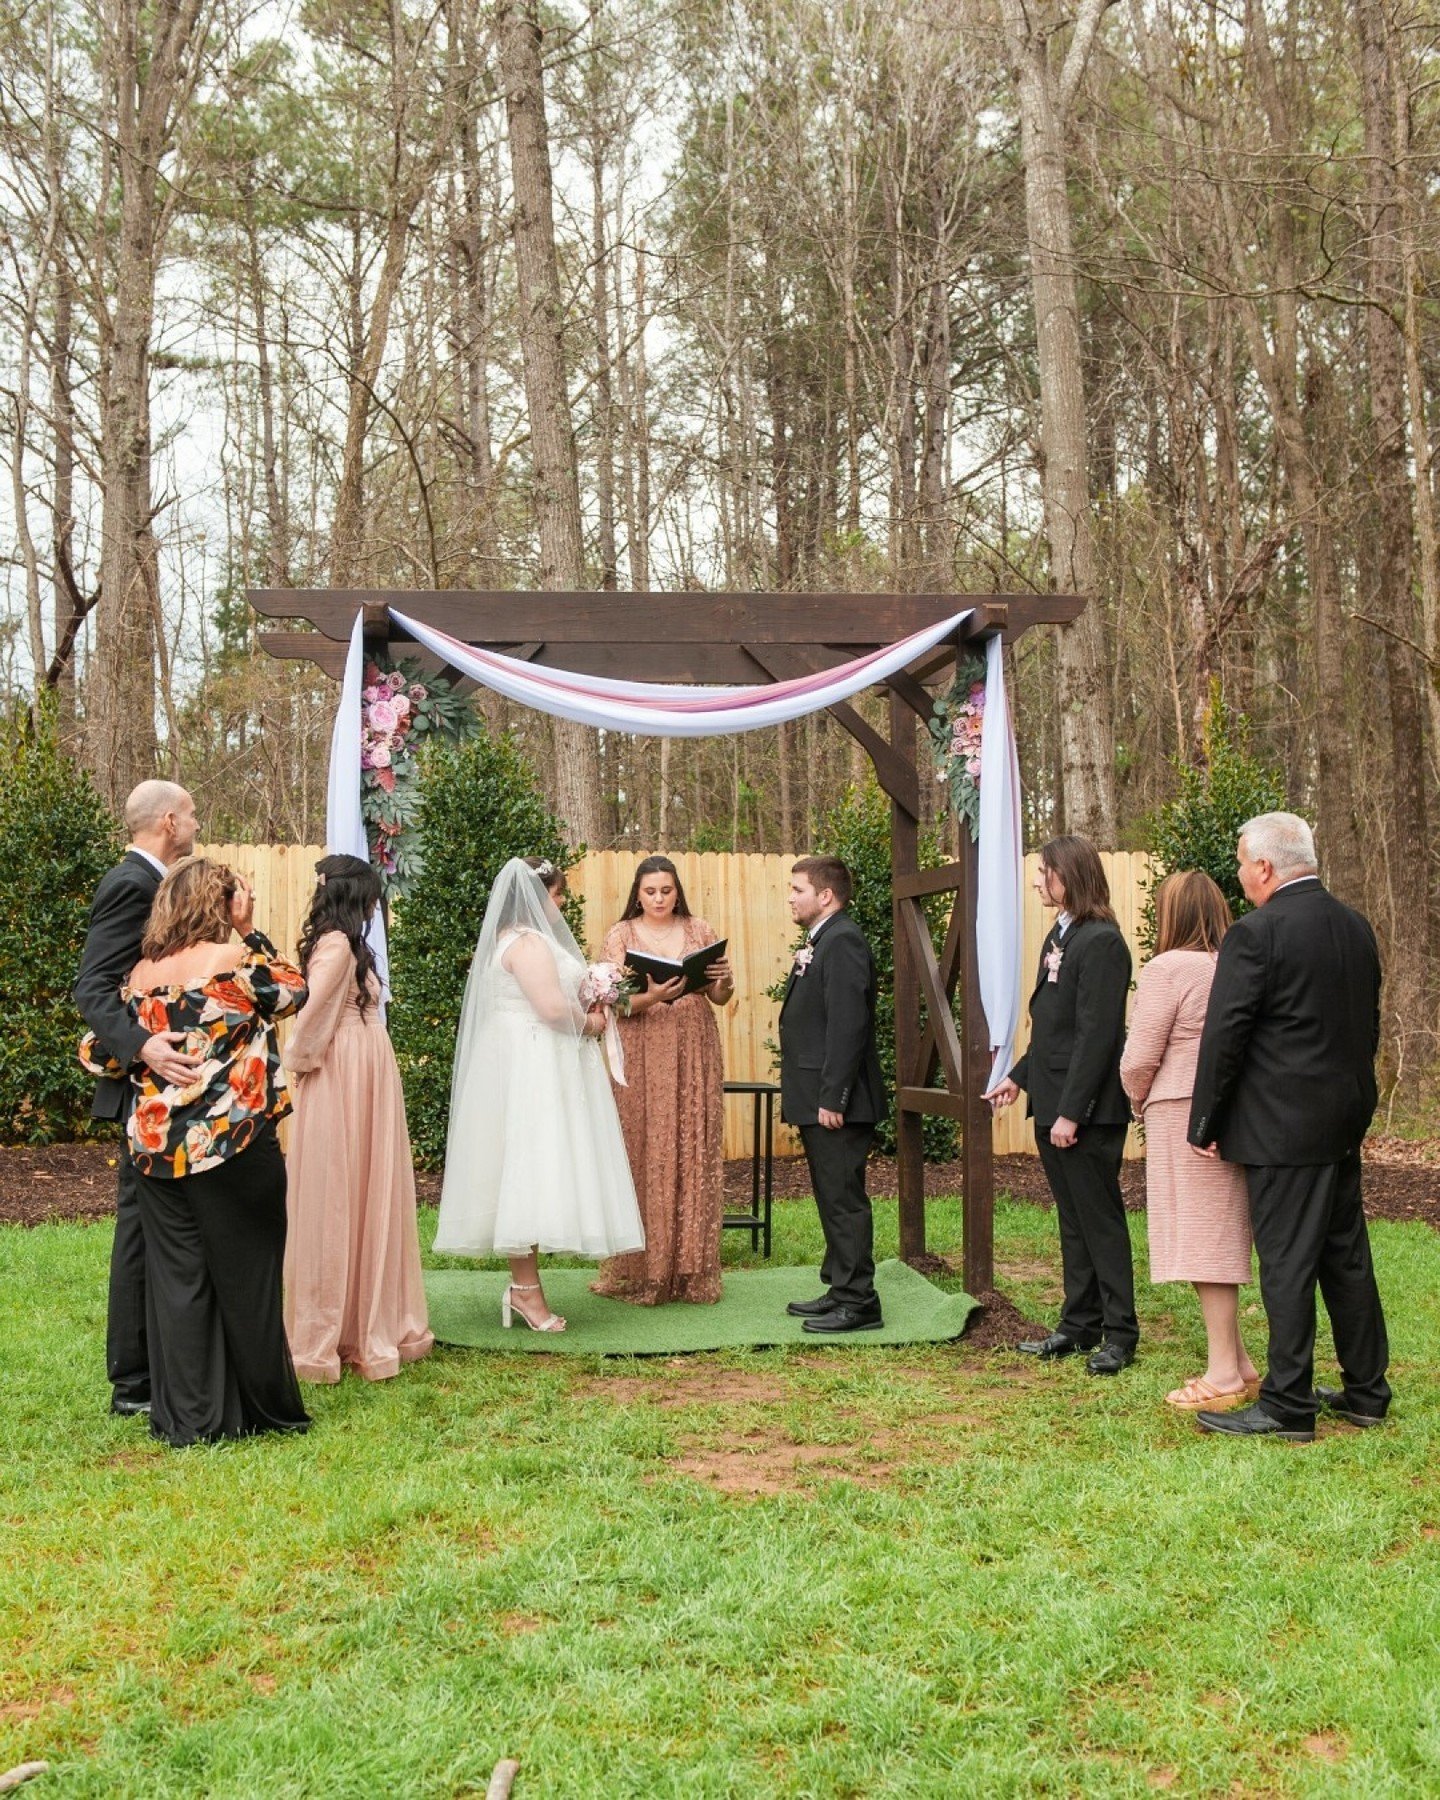 Happy Monthiversary to Sela and Kyle!  Their backyard wedding was so special, with the prettiest little arch built in the backyard where Kyle grew up, Sela's sister as the officiant, and the most precious ring-bearing flowerdog!  I love intimate wedd